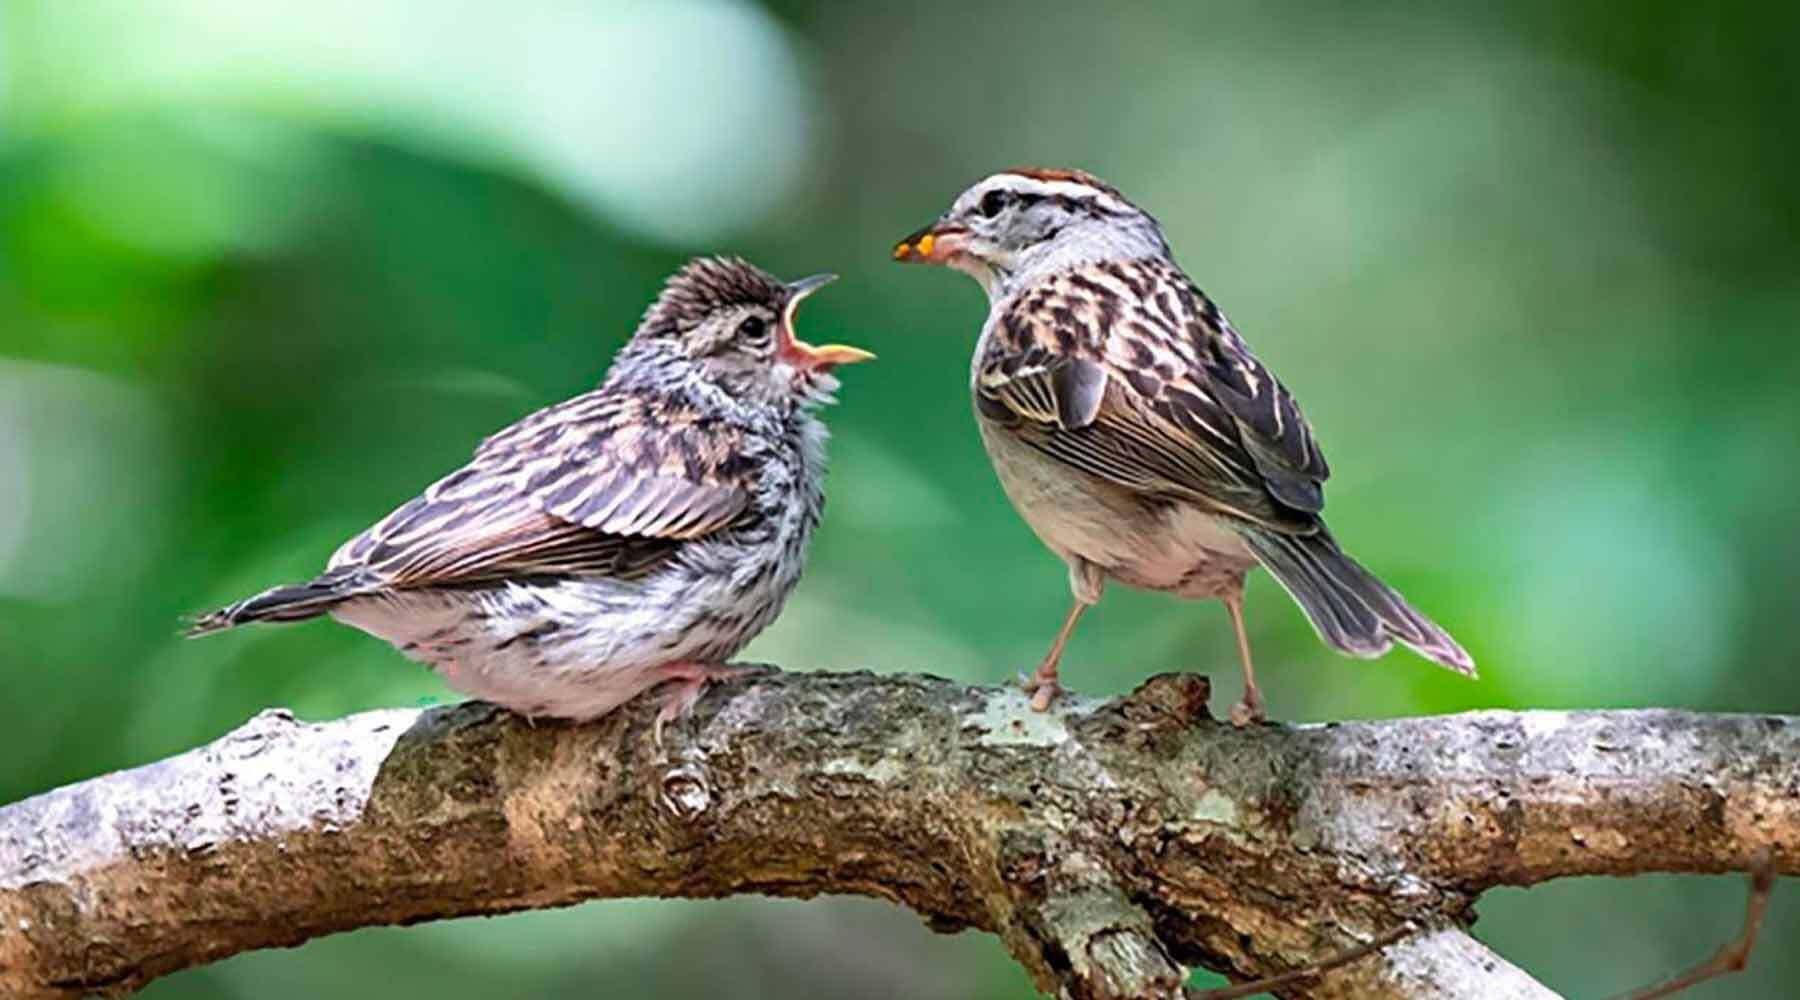 Two Small Birds on Tree Branch